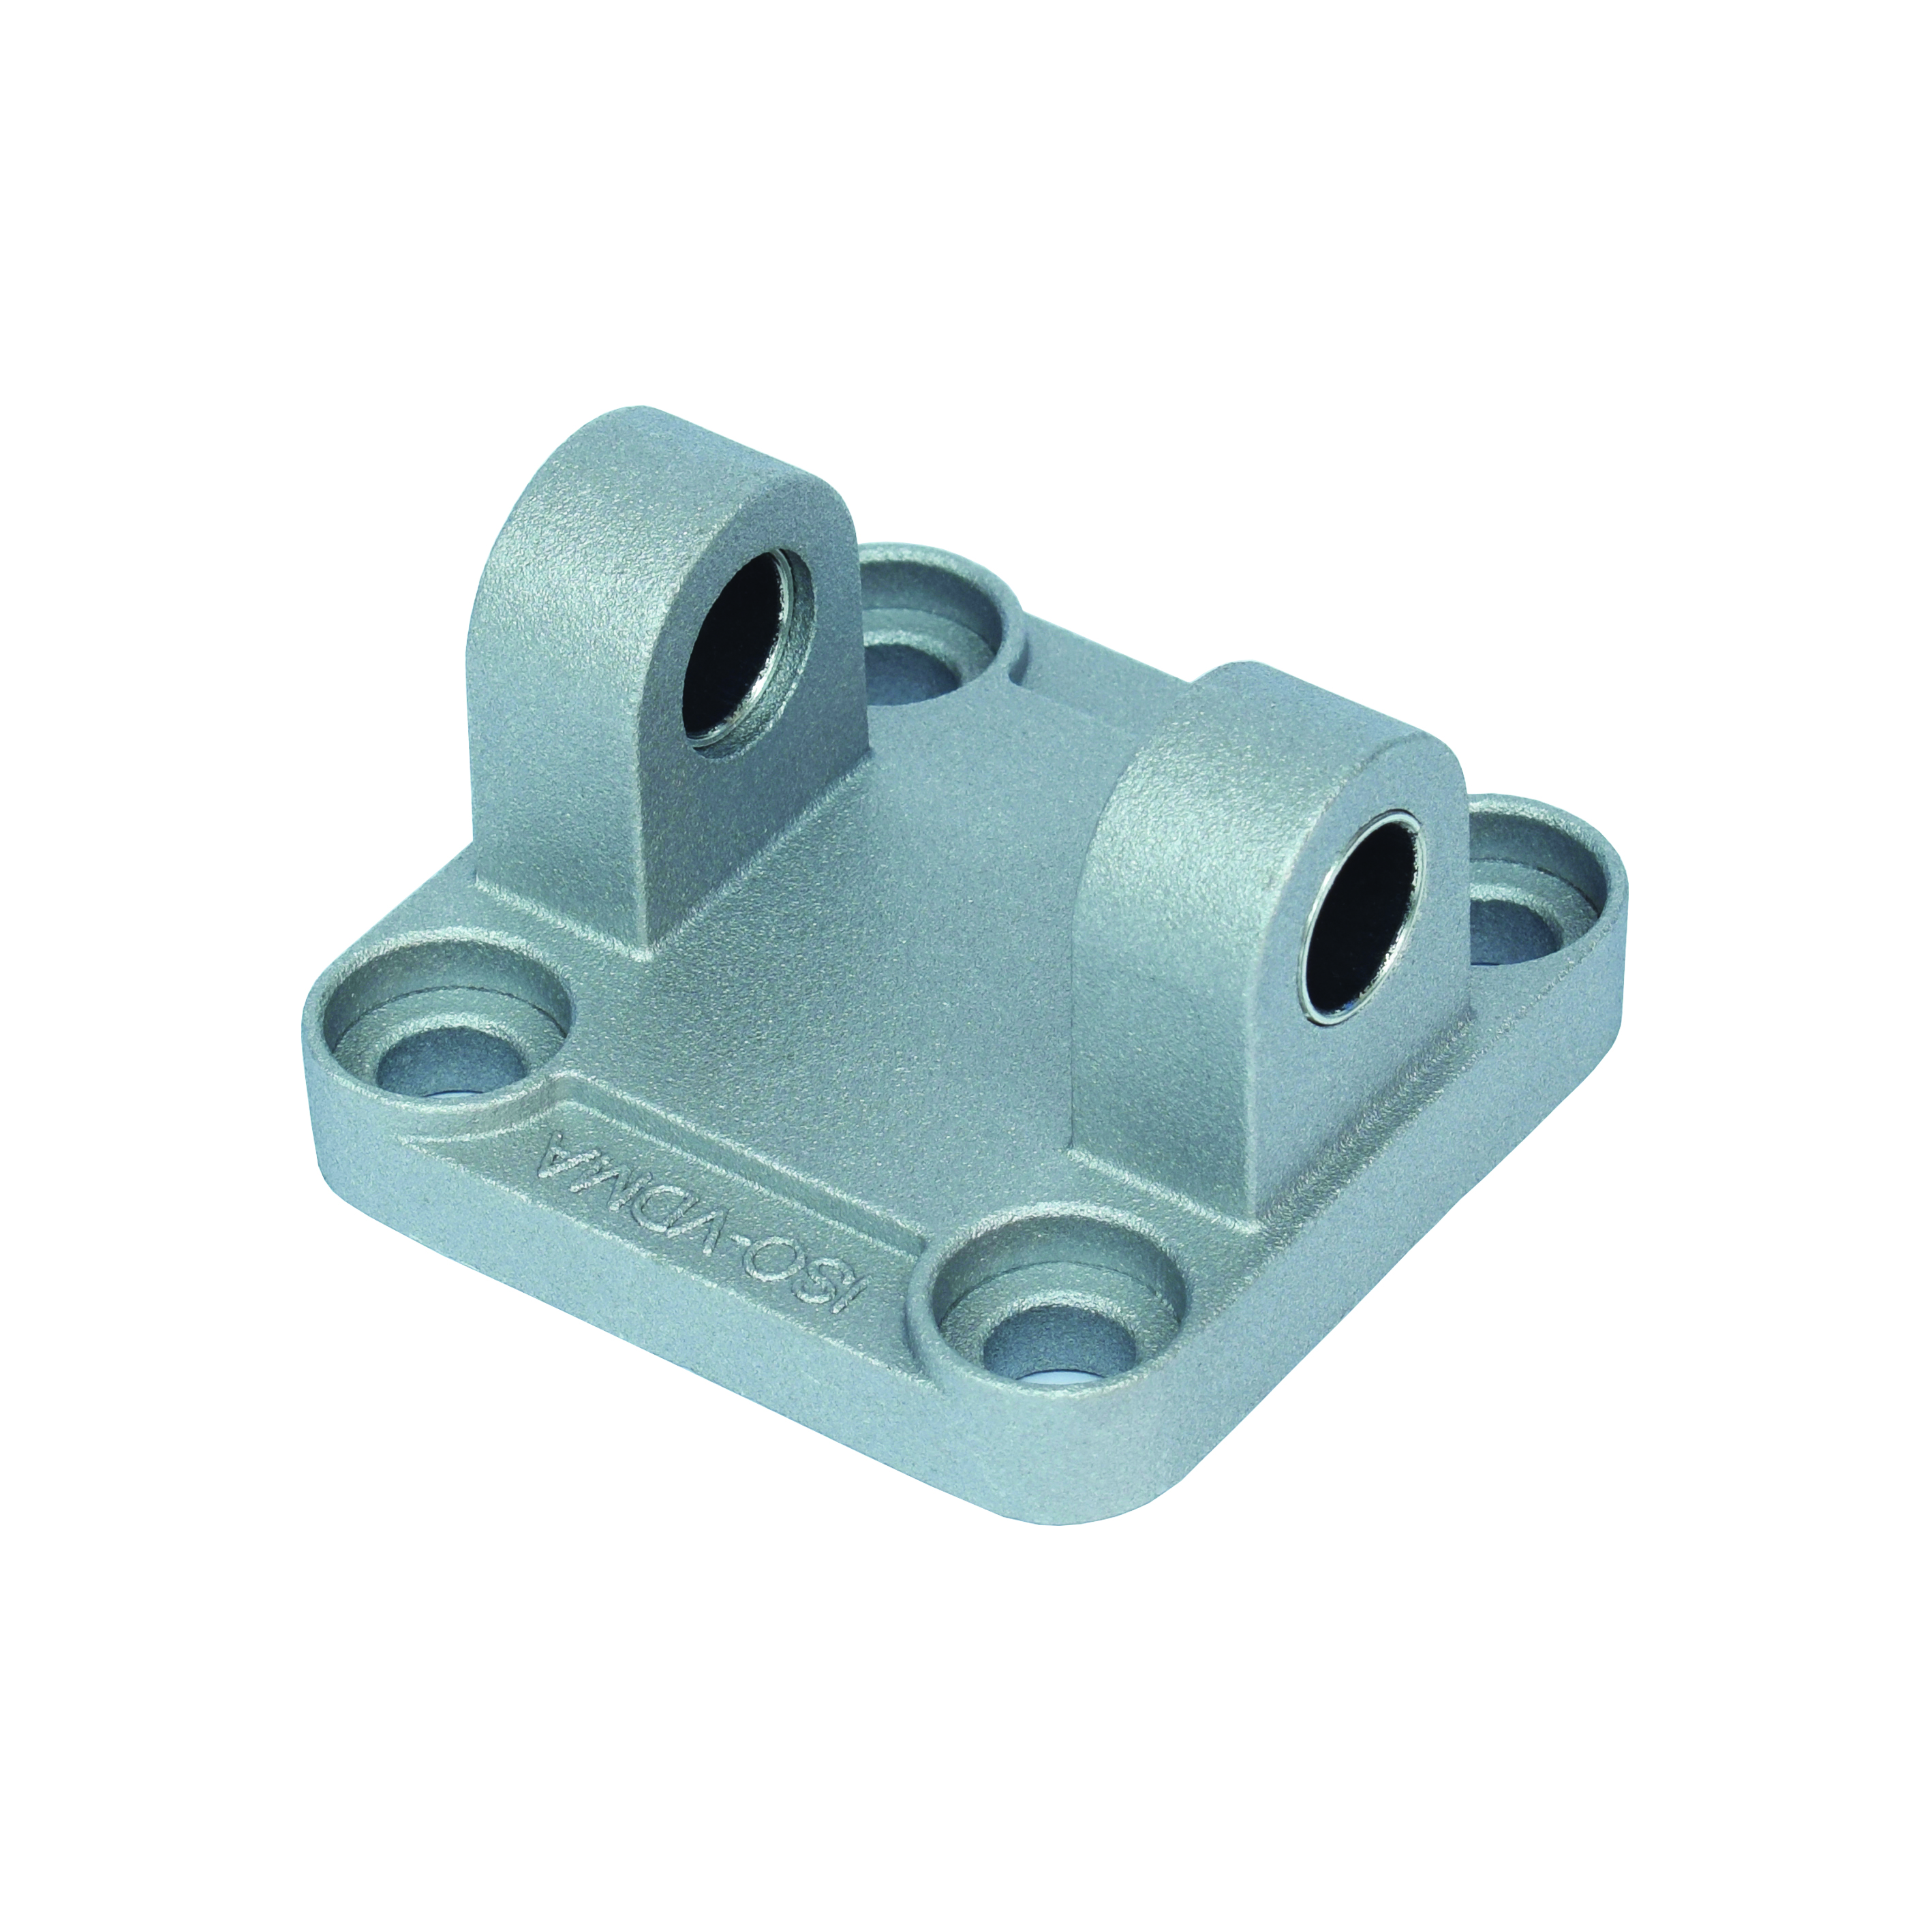 Female rear joint for pneumatic cylinders ISO 15552 Ø100